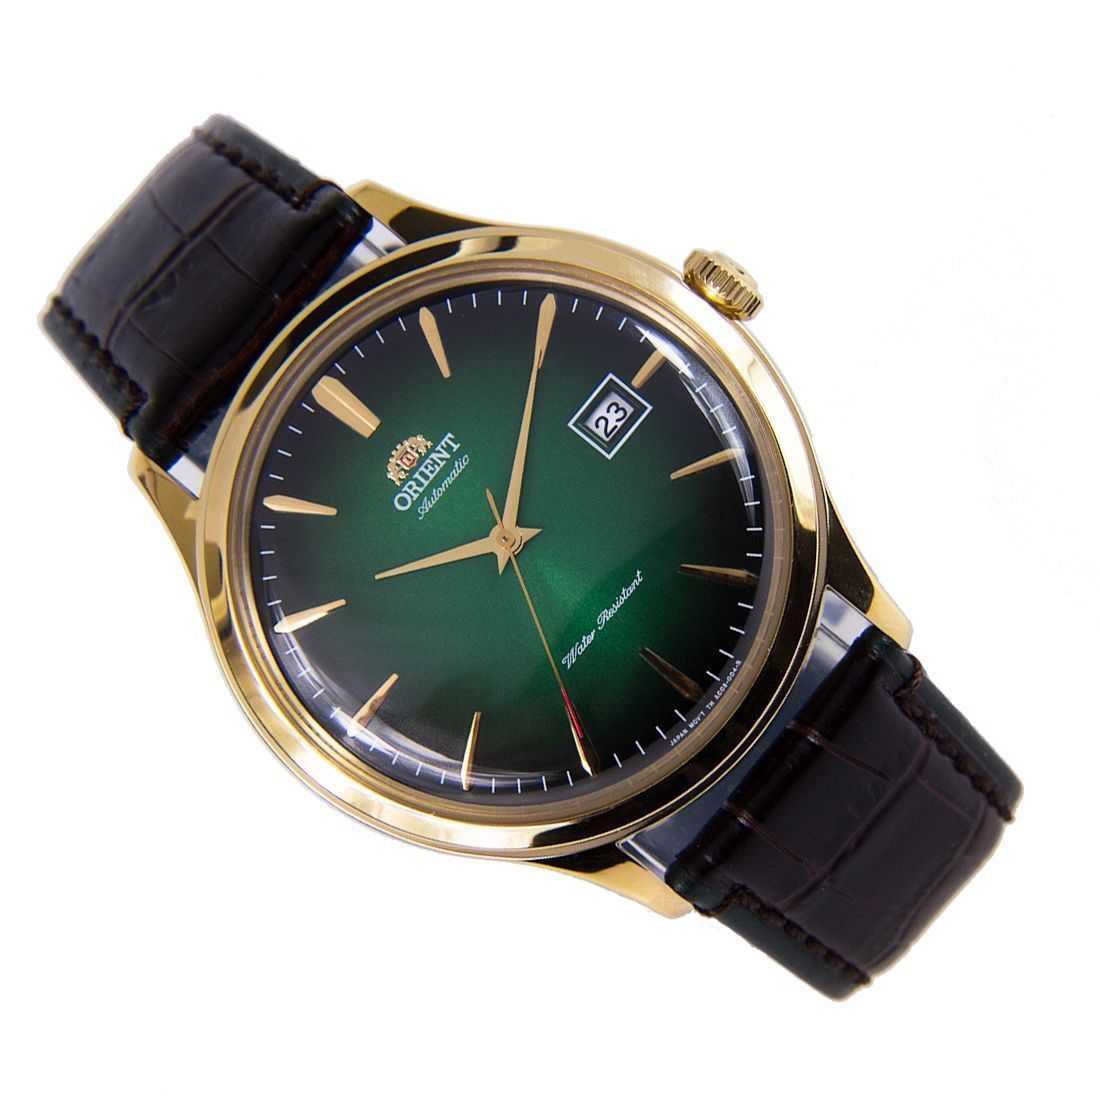 Orient Bambino Mechanical FAC08002F0 AC08002F Green Dial Leather Mens Watch -Orient